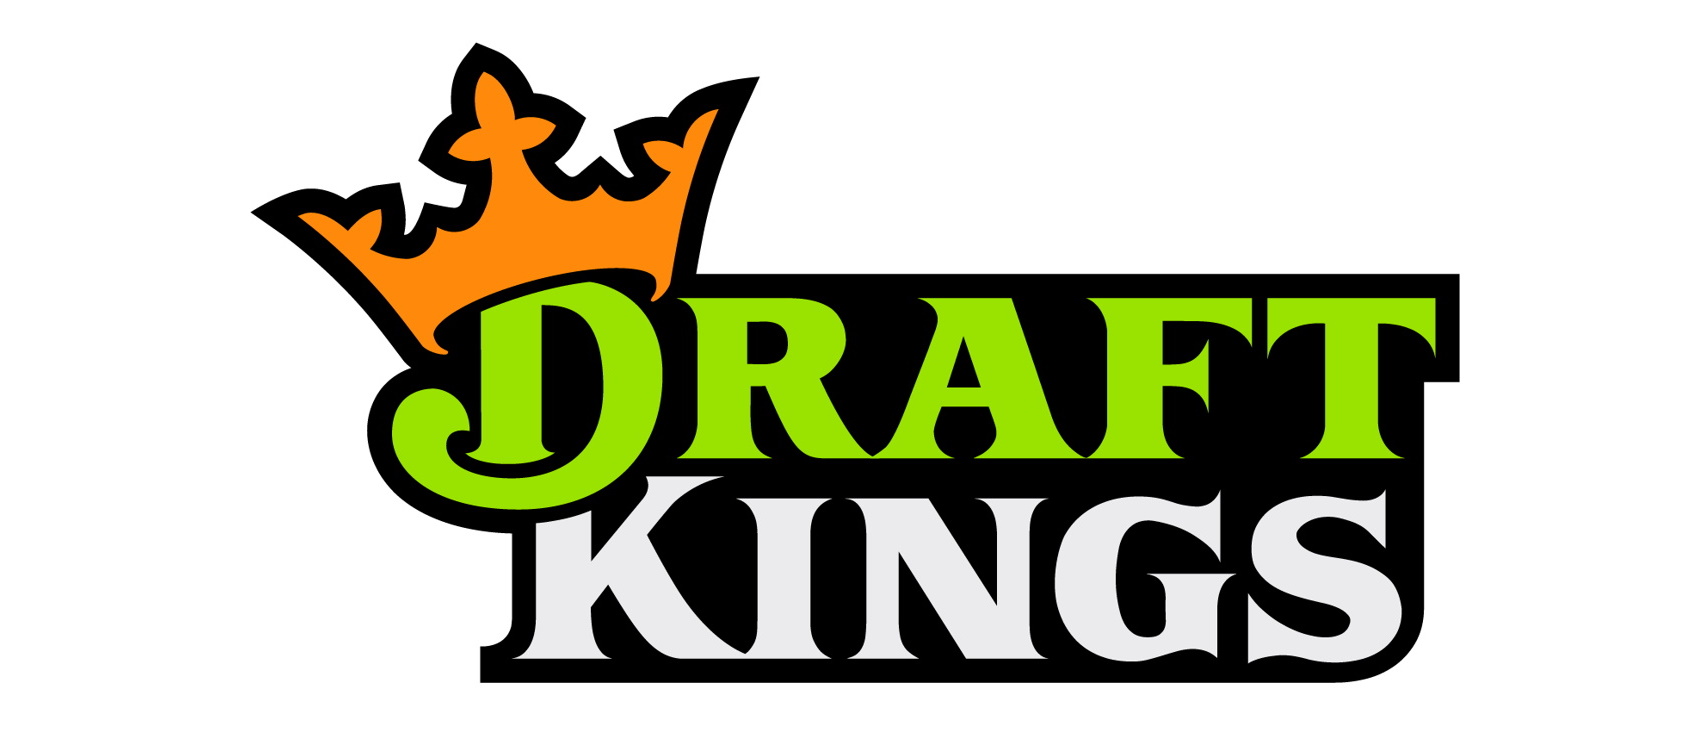 DraftKings sued by Colossus Bets over patent infringement